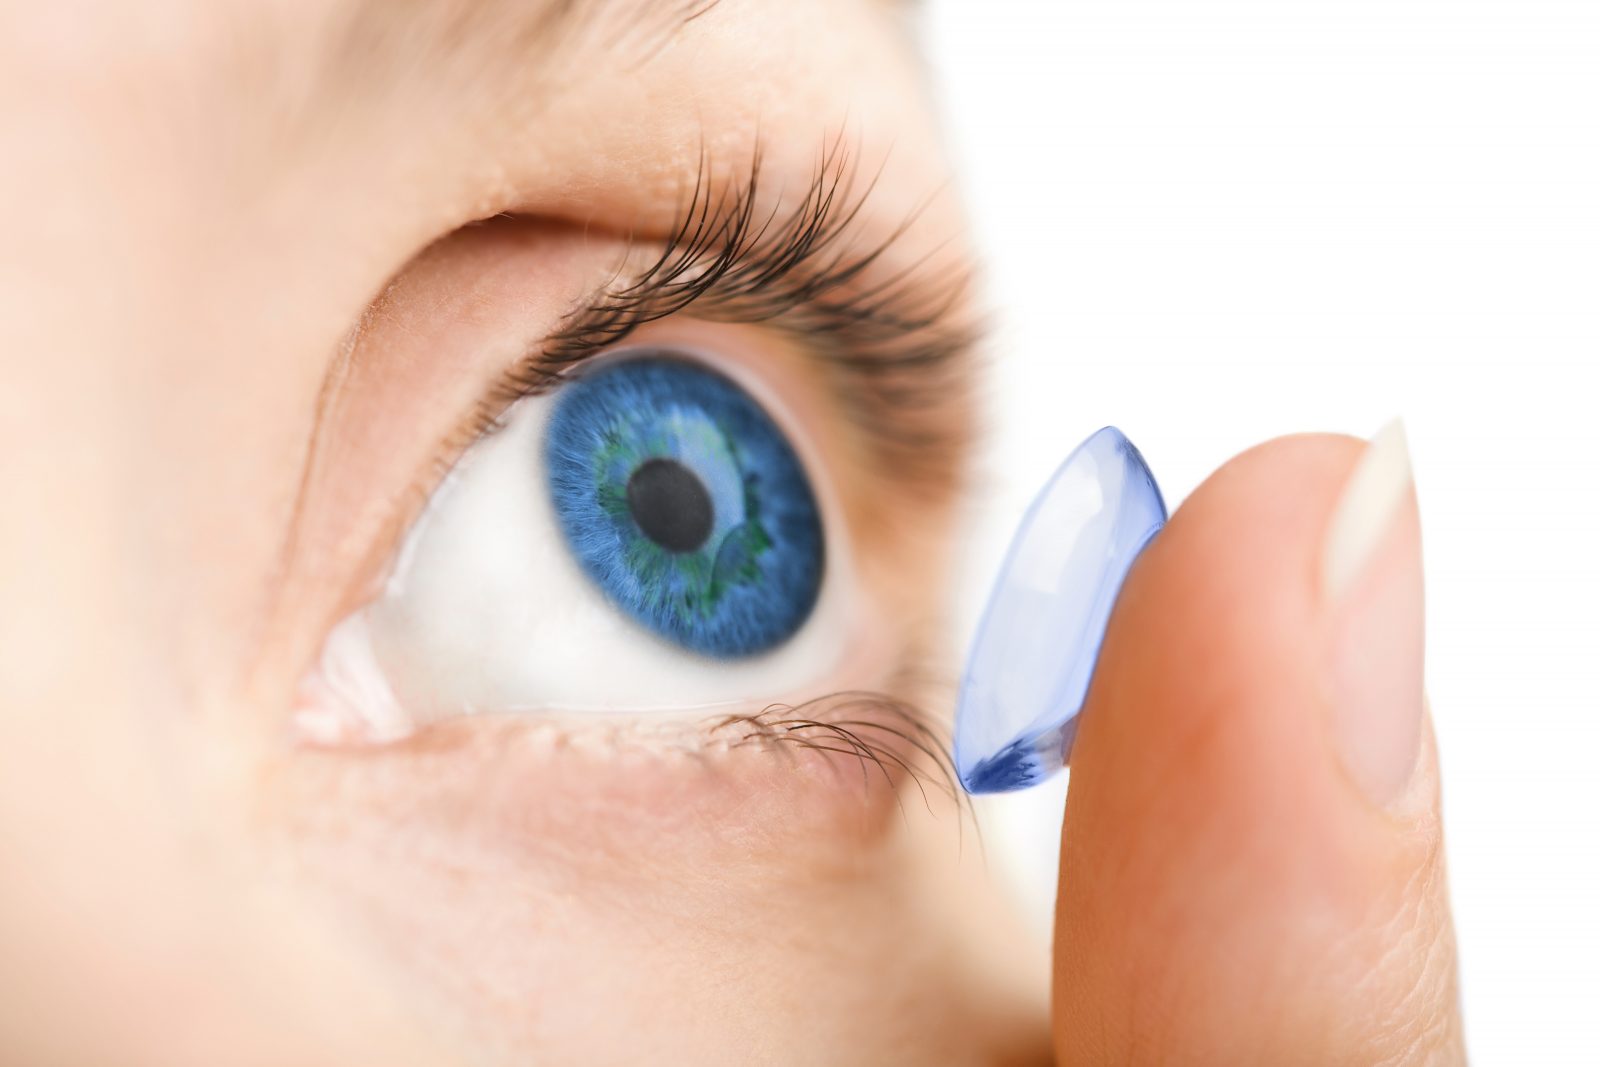 Stop flushing your disposable contact lenses and recycle them for free at local eye doctors throughtout Cornwall